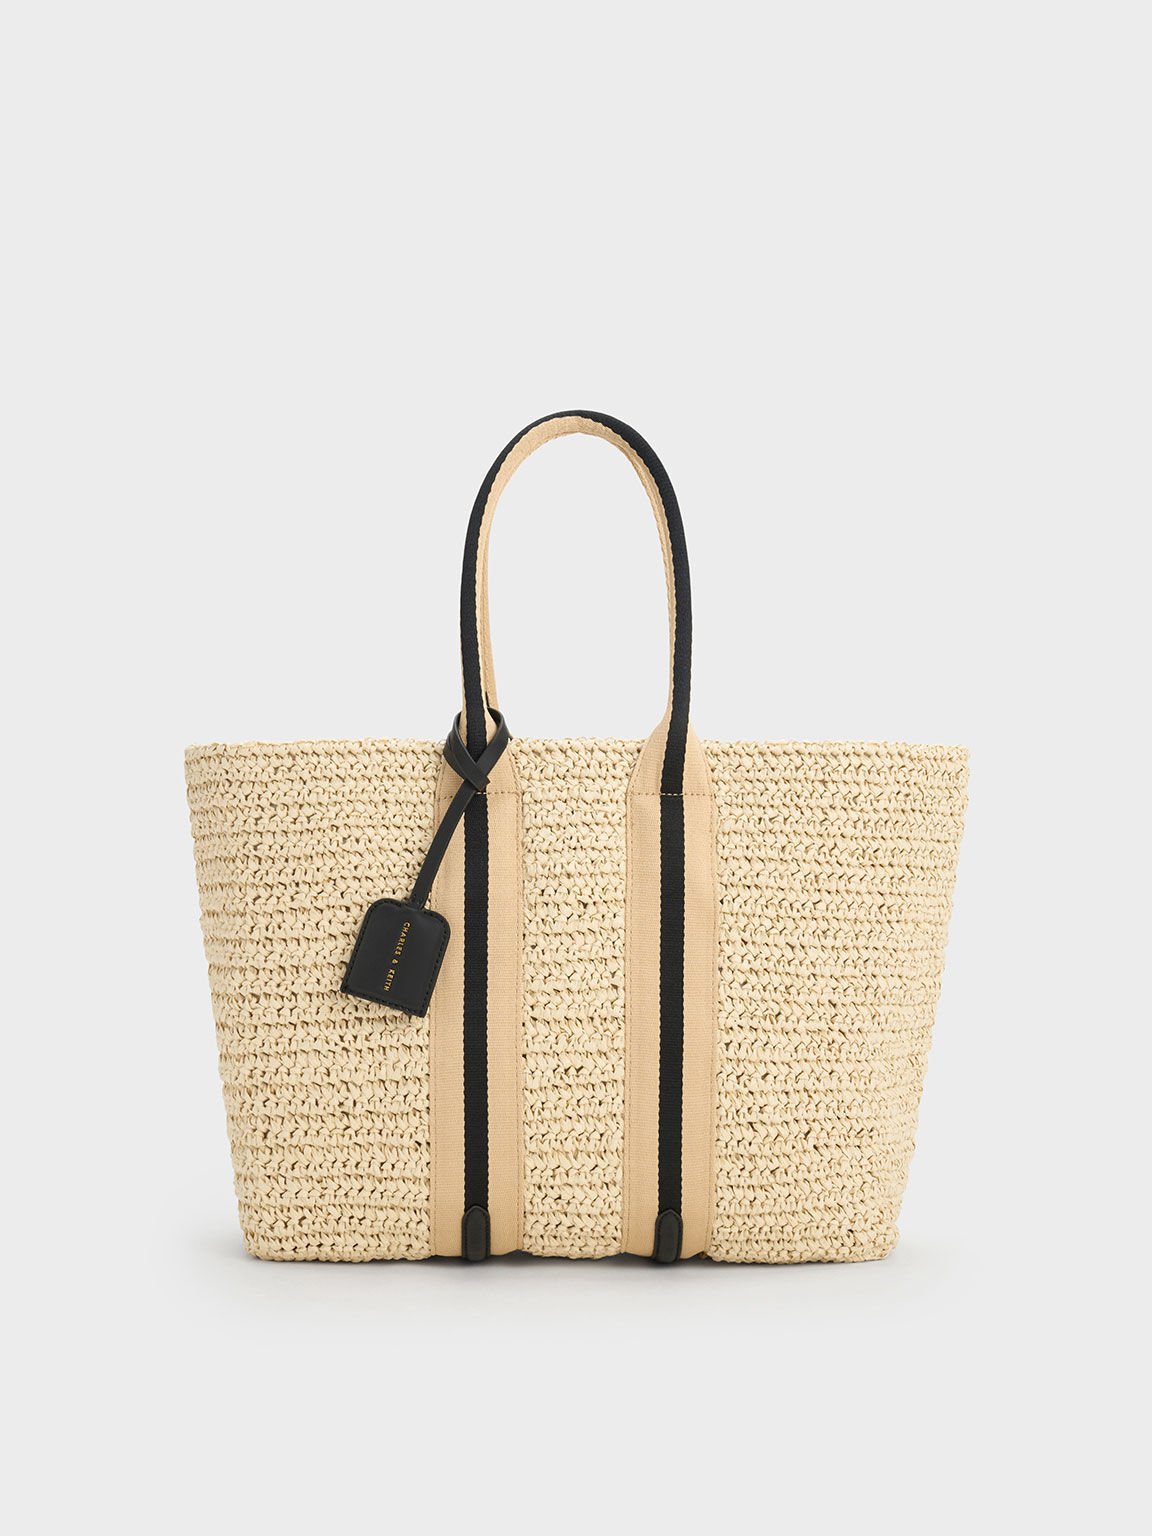 Stylish and Sustainable Moroccan Straw Tote Bag